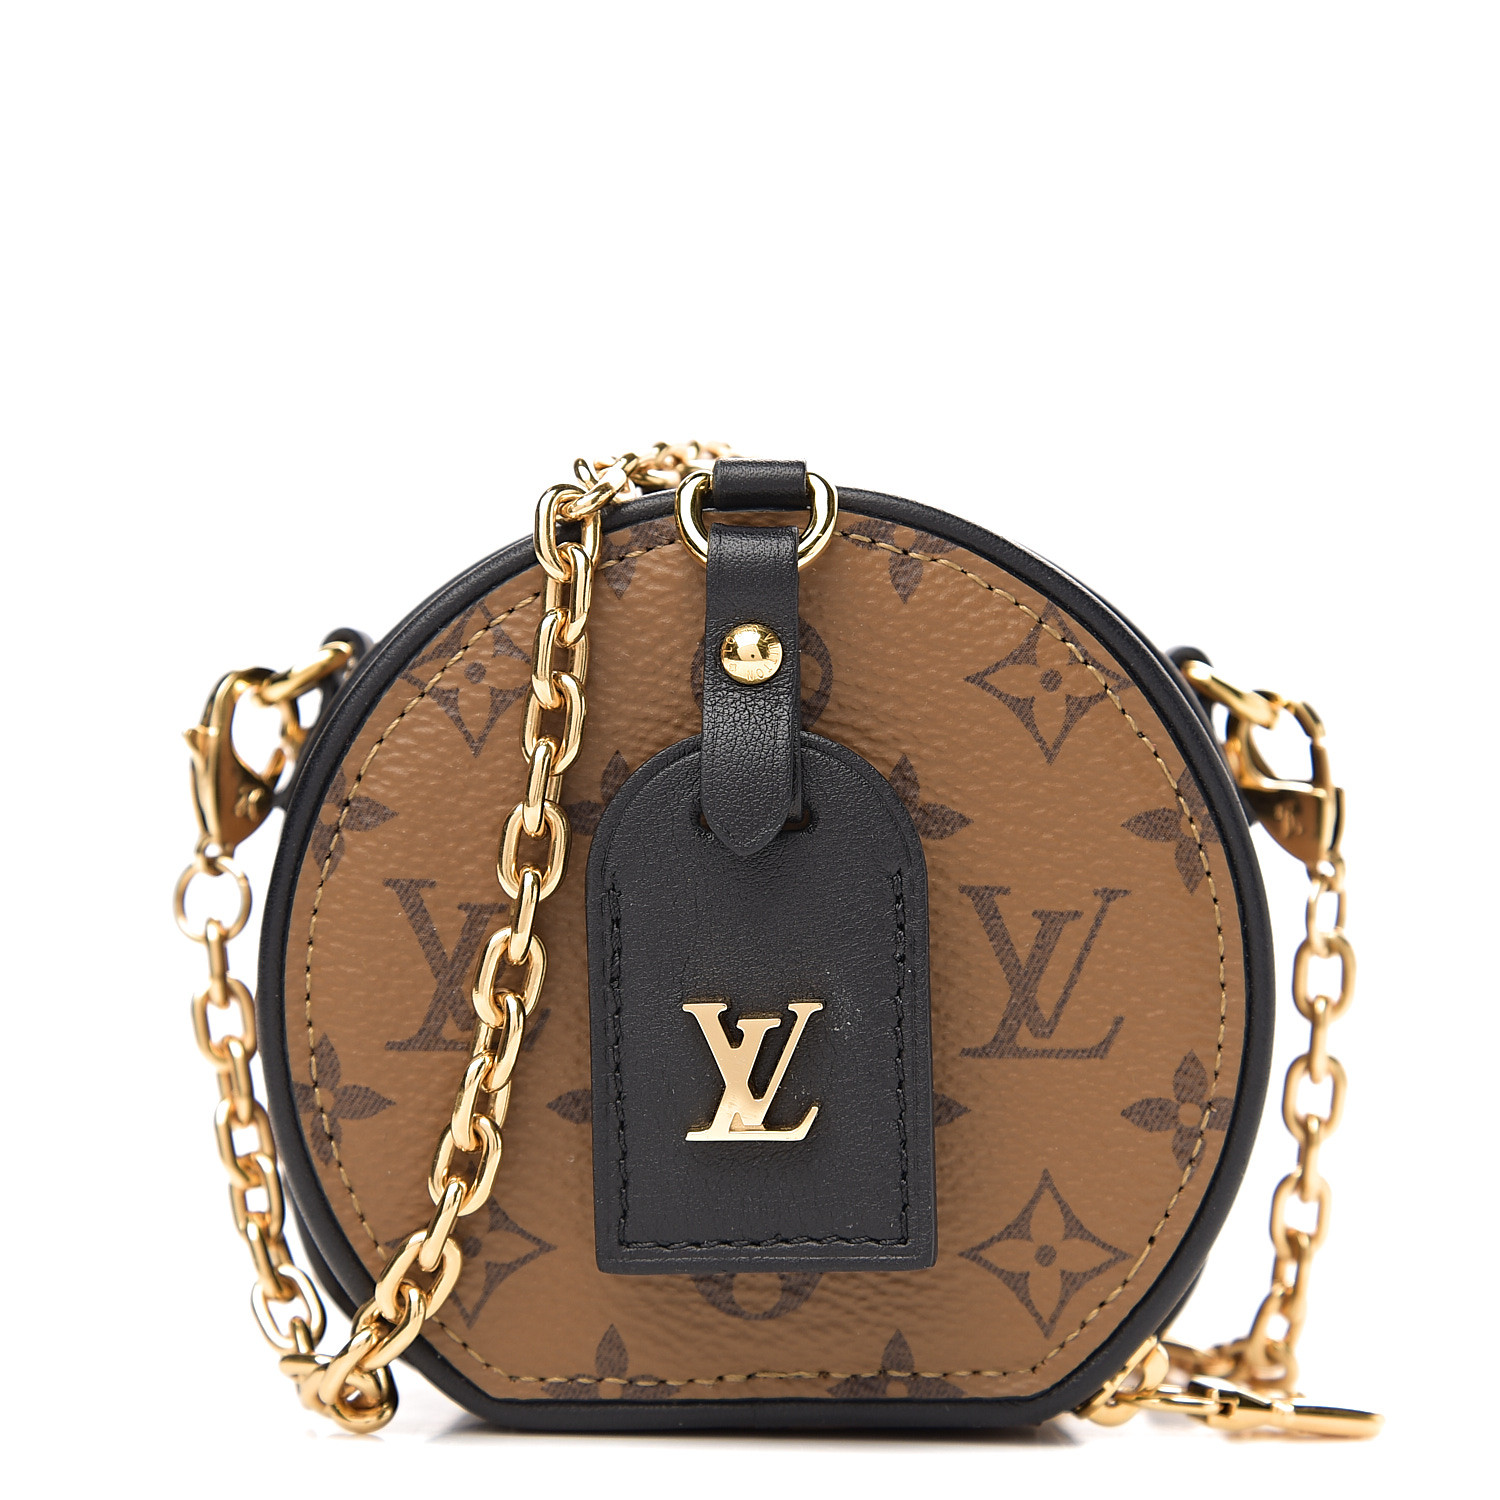 Louis Vuitton Tag Necklace  Natural Resource Department